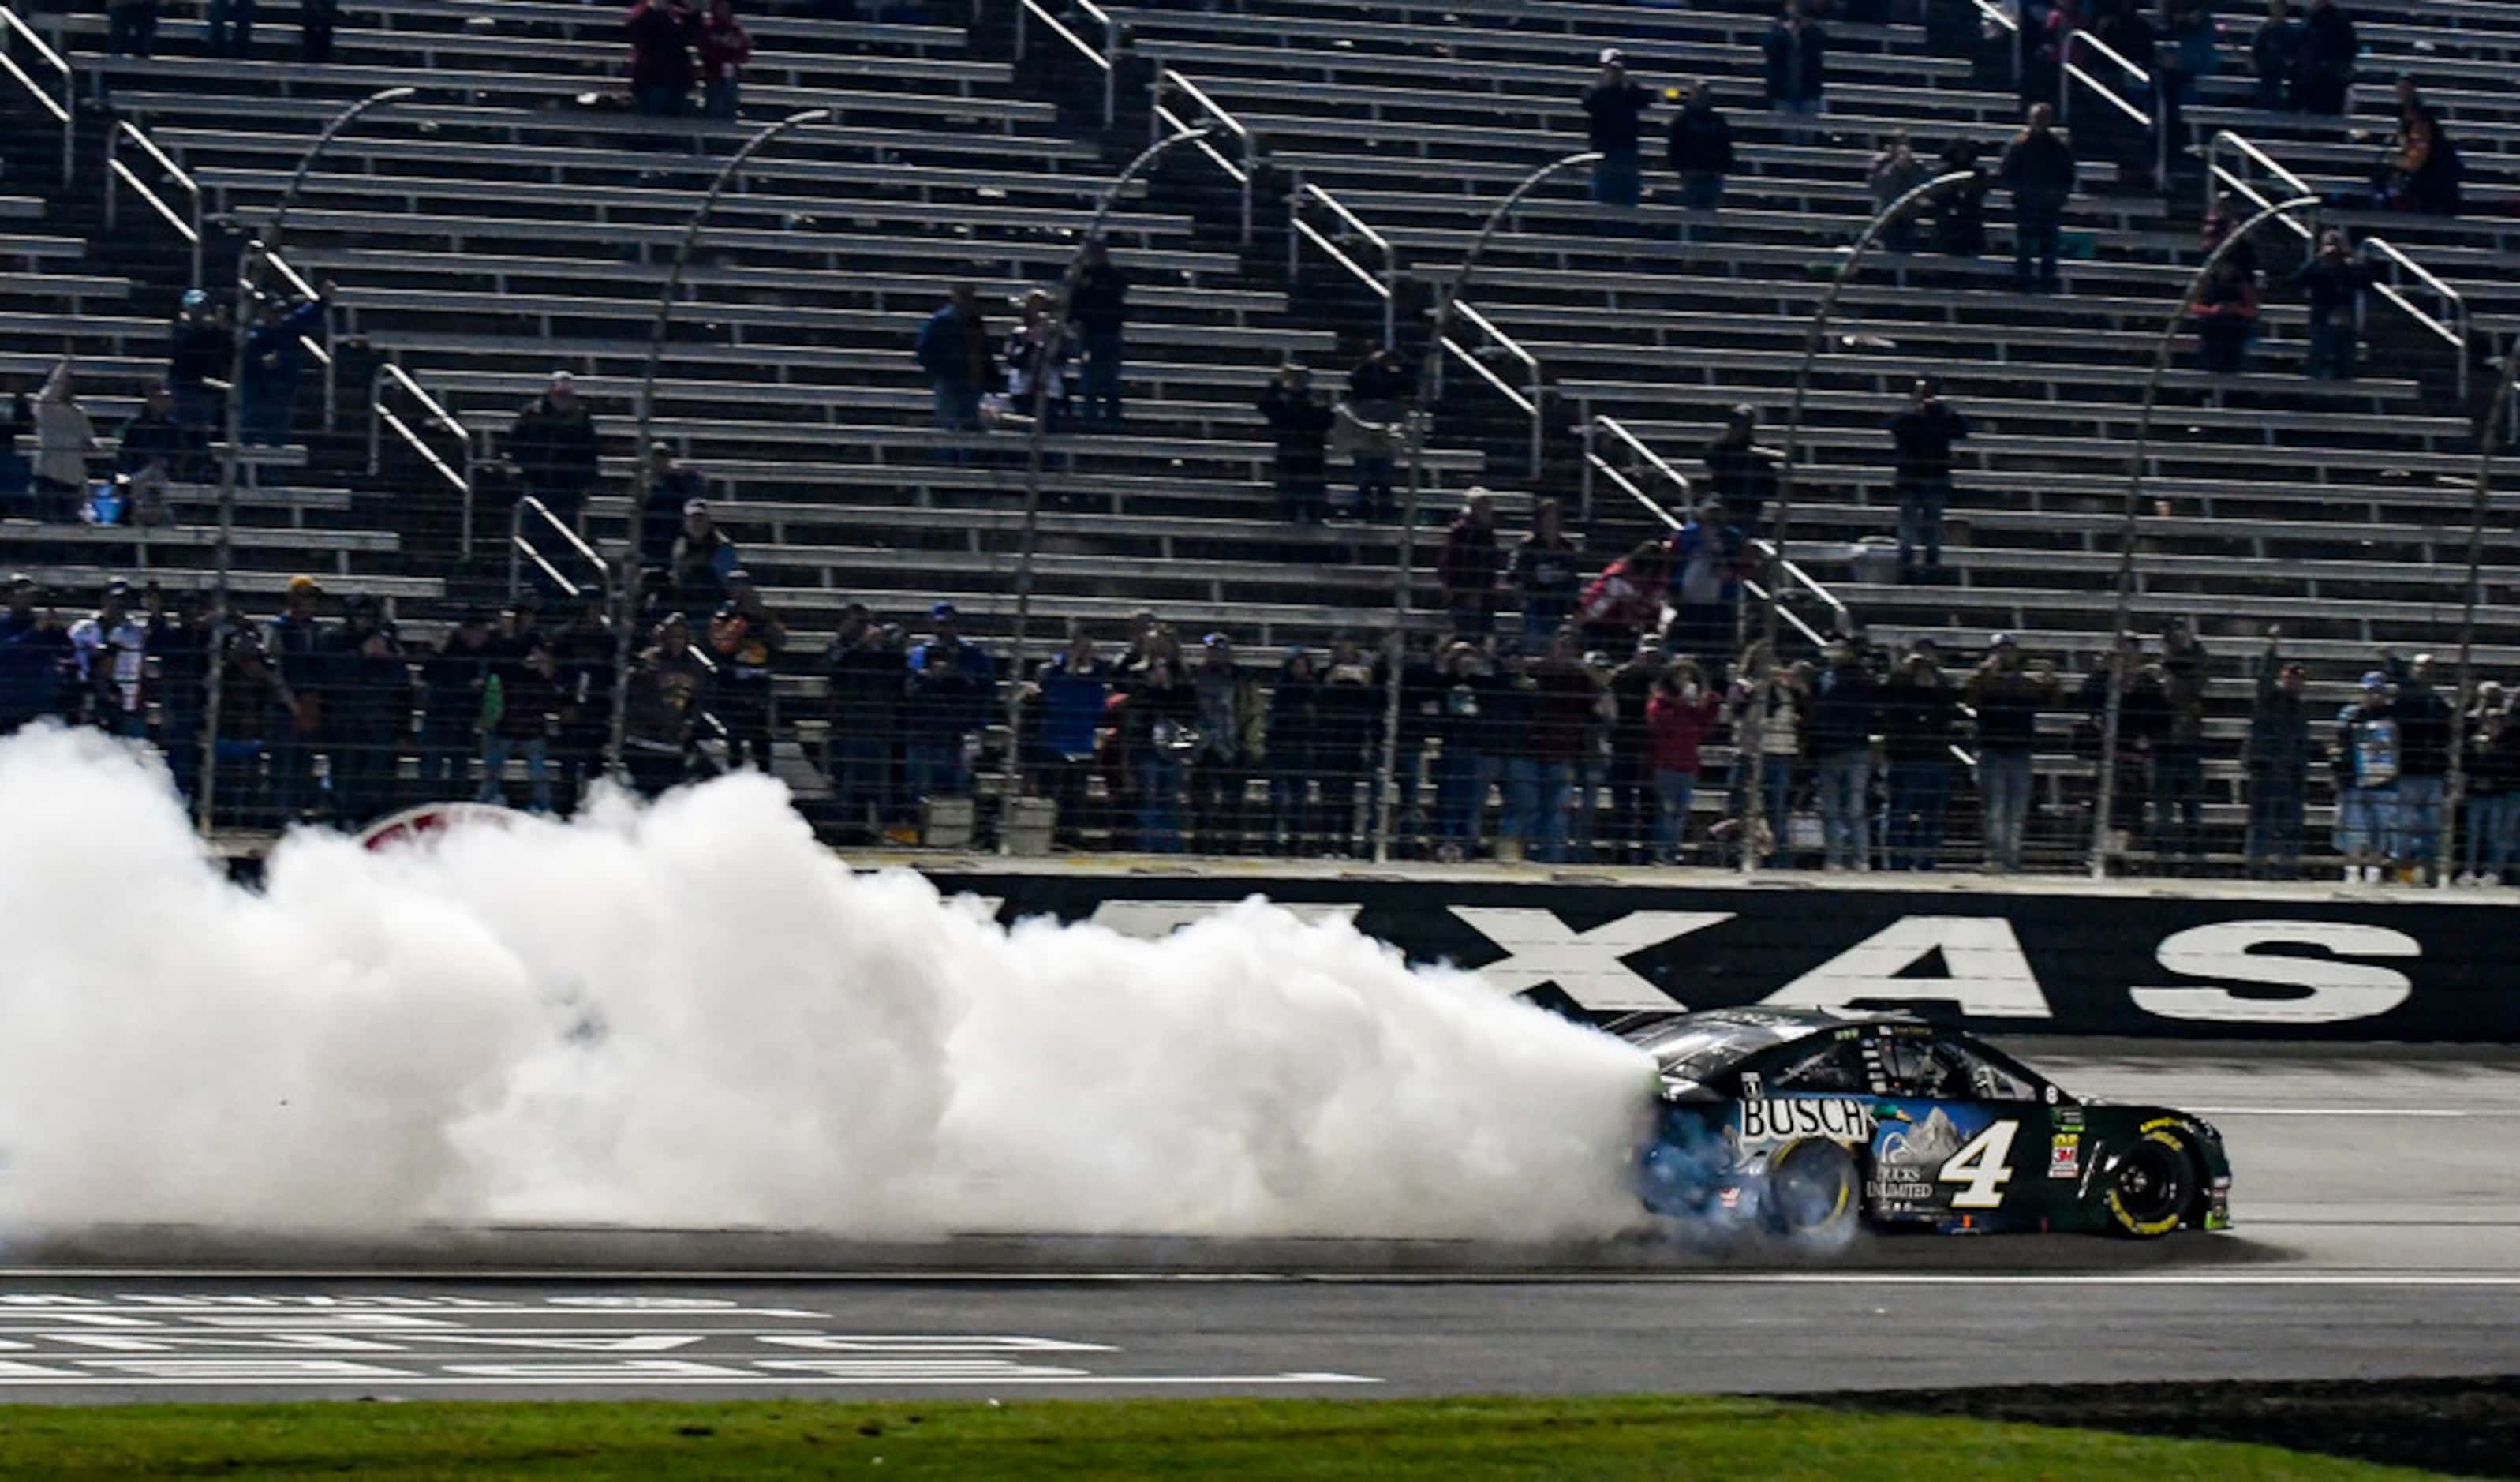 Kevin Harvick (4) celebrates winning a NASCAR Cup Series auto race with a burnout at Texas...